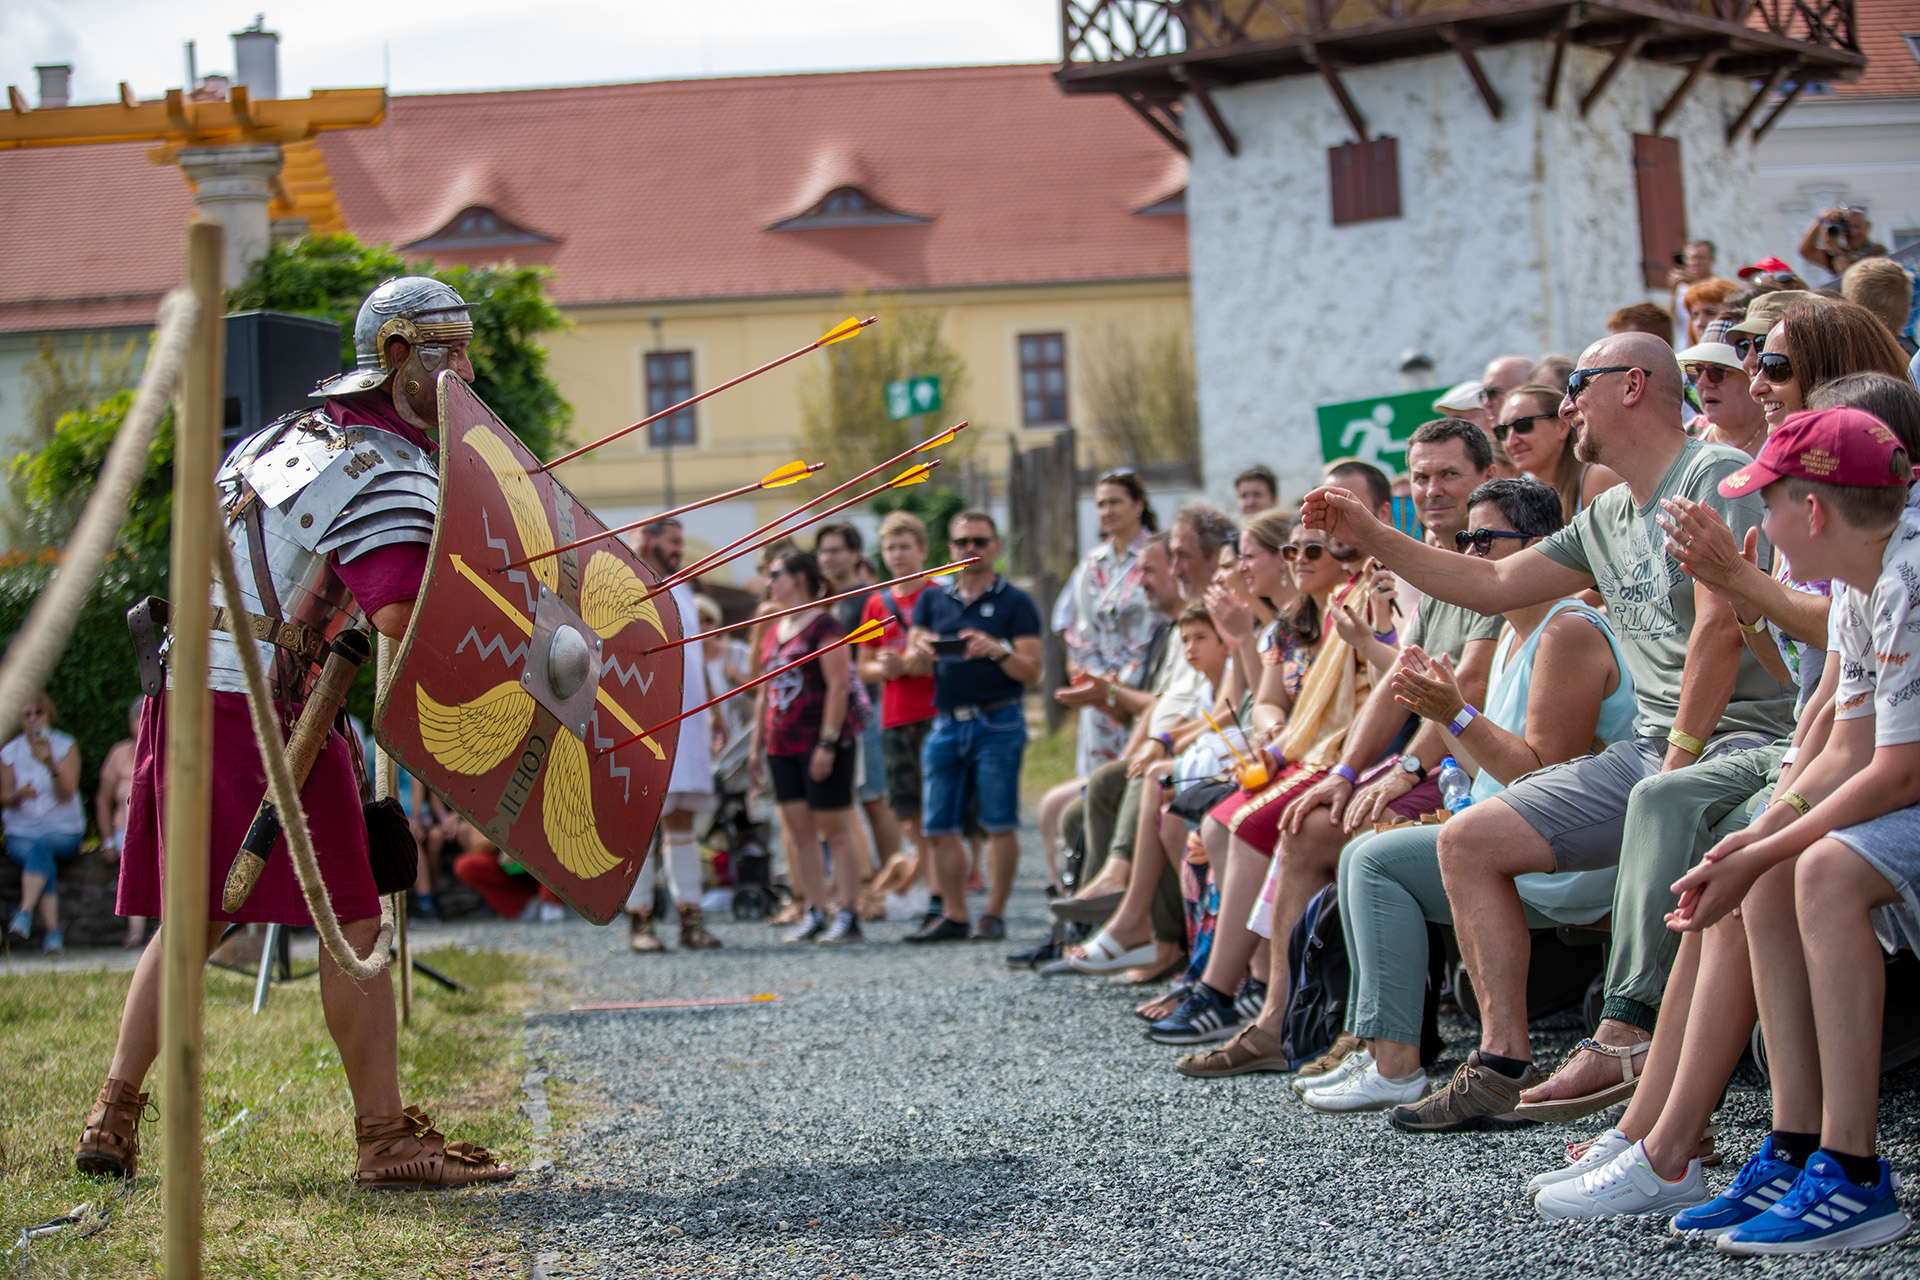 Savaria Historical Carnival in Szombathely: 300 Events Over 4 Days at End of August